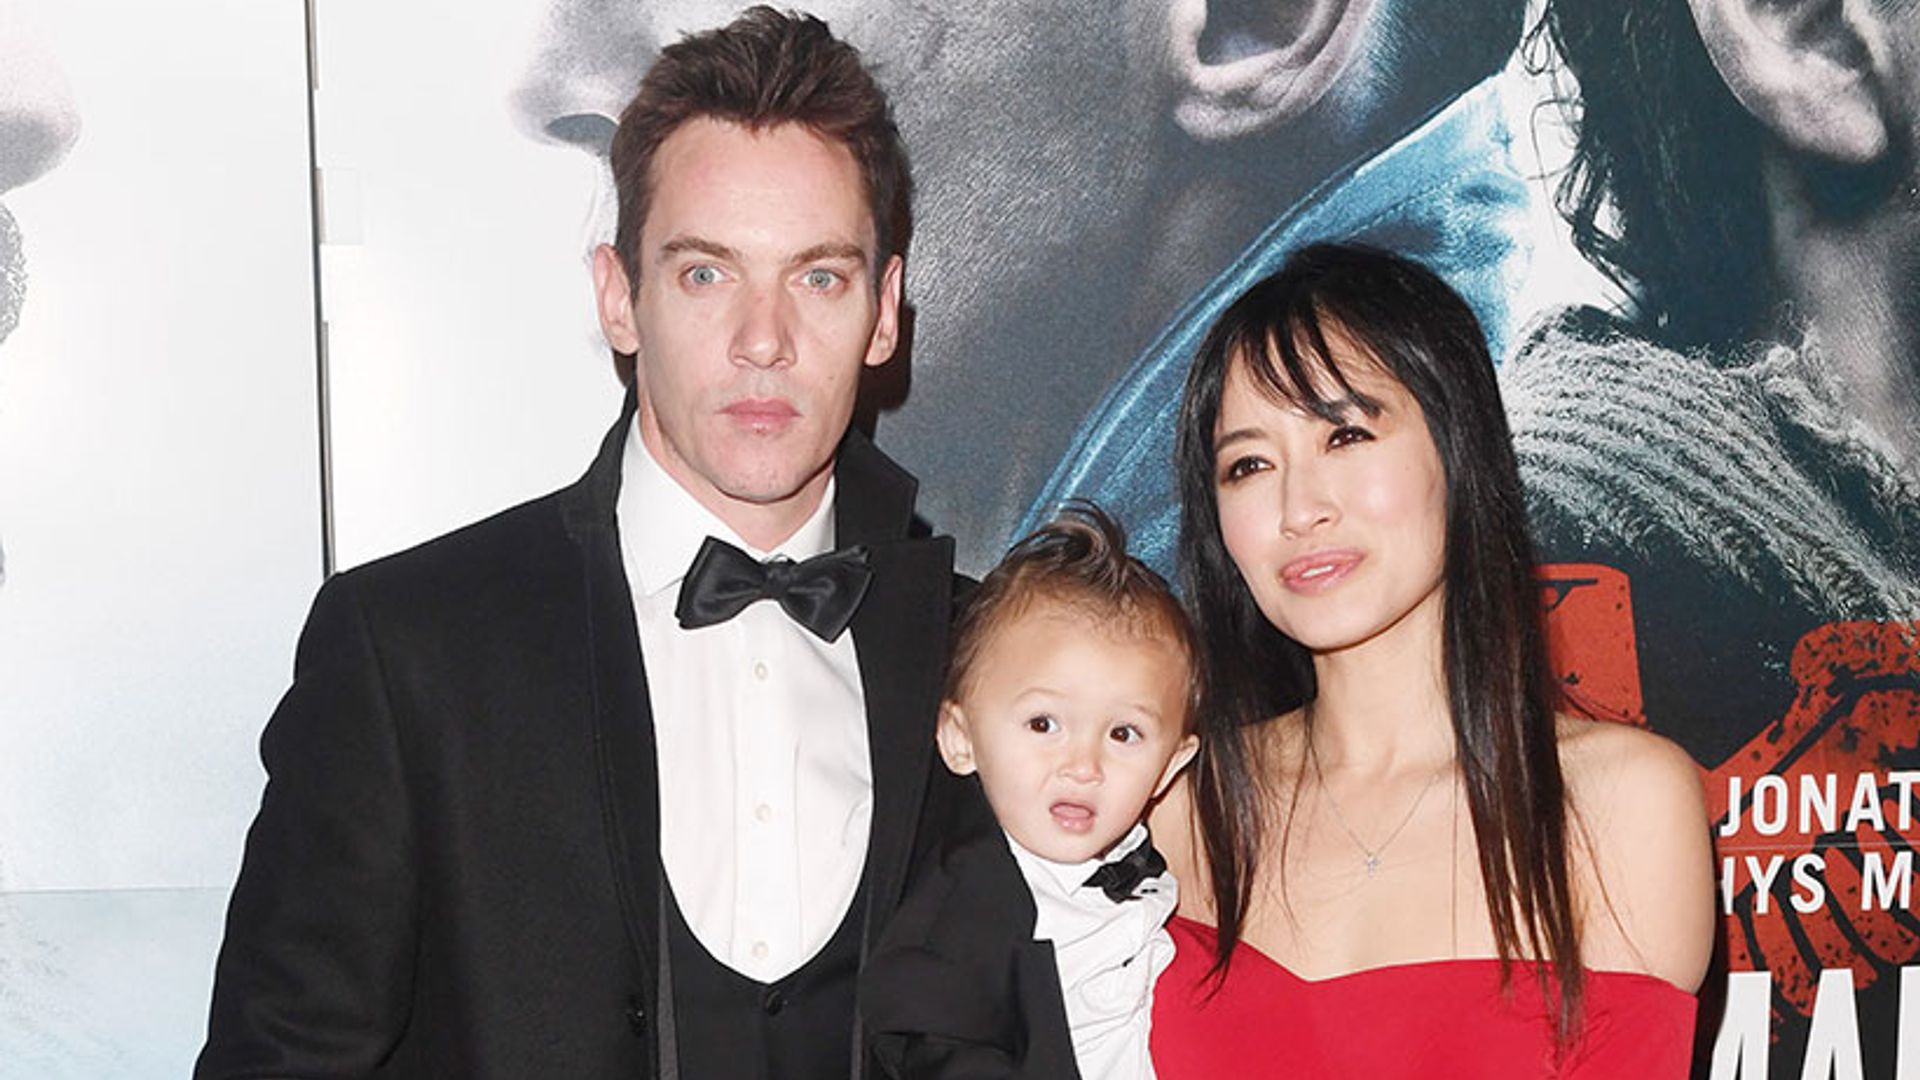 Jonathan Rhys Meyers and wife Mara Lane's baby son Wolf makes first red carpet appearance